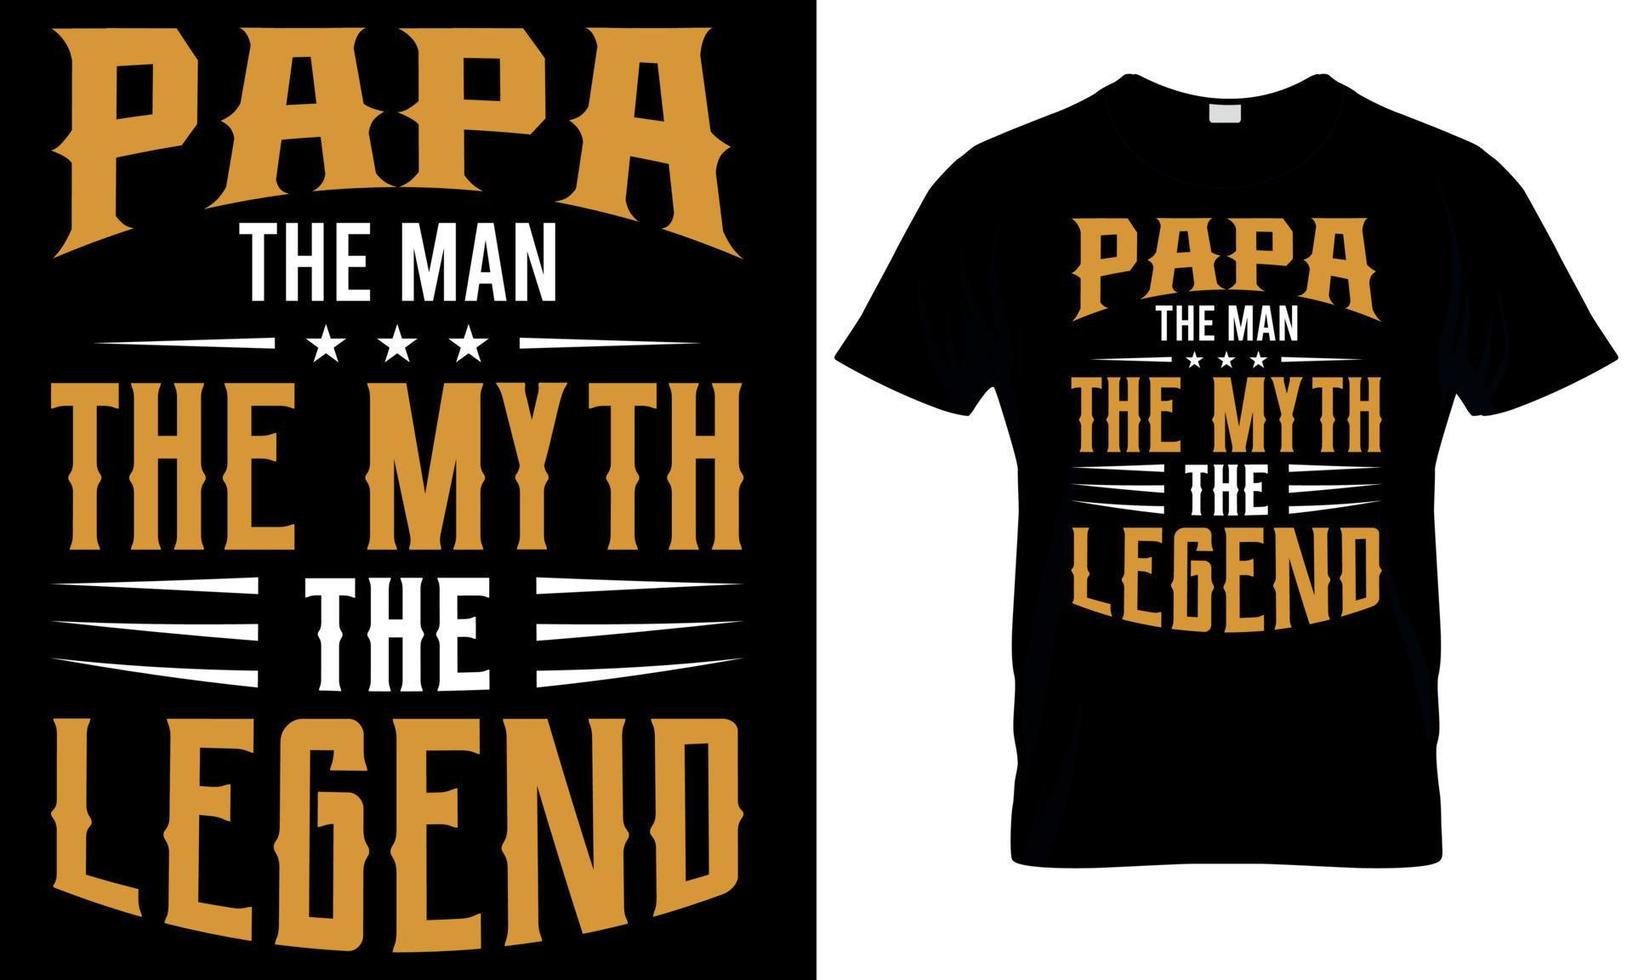 Papa the man the the myth the legend. dad, papa, father t shirt vector